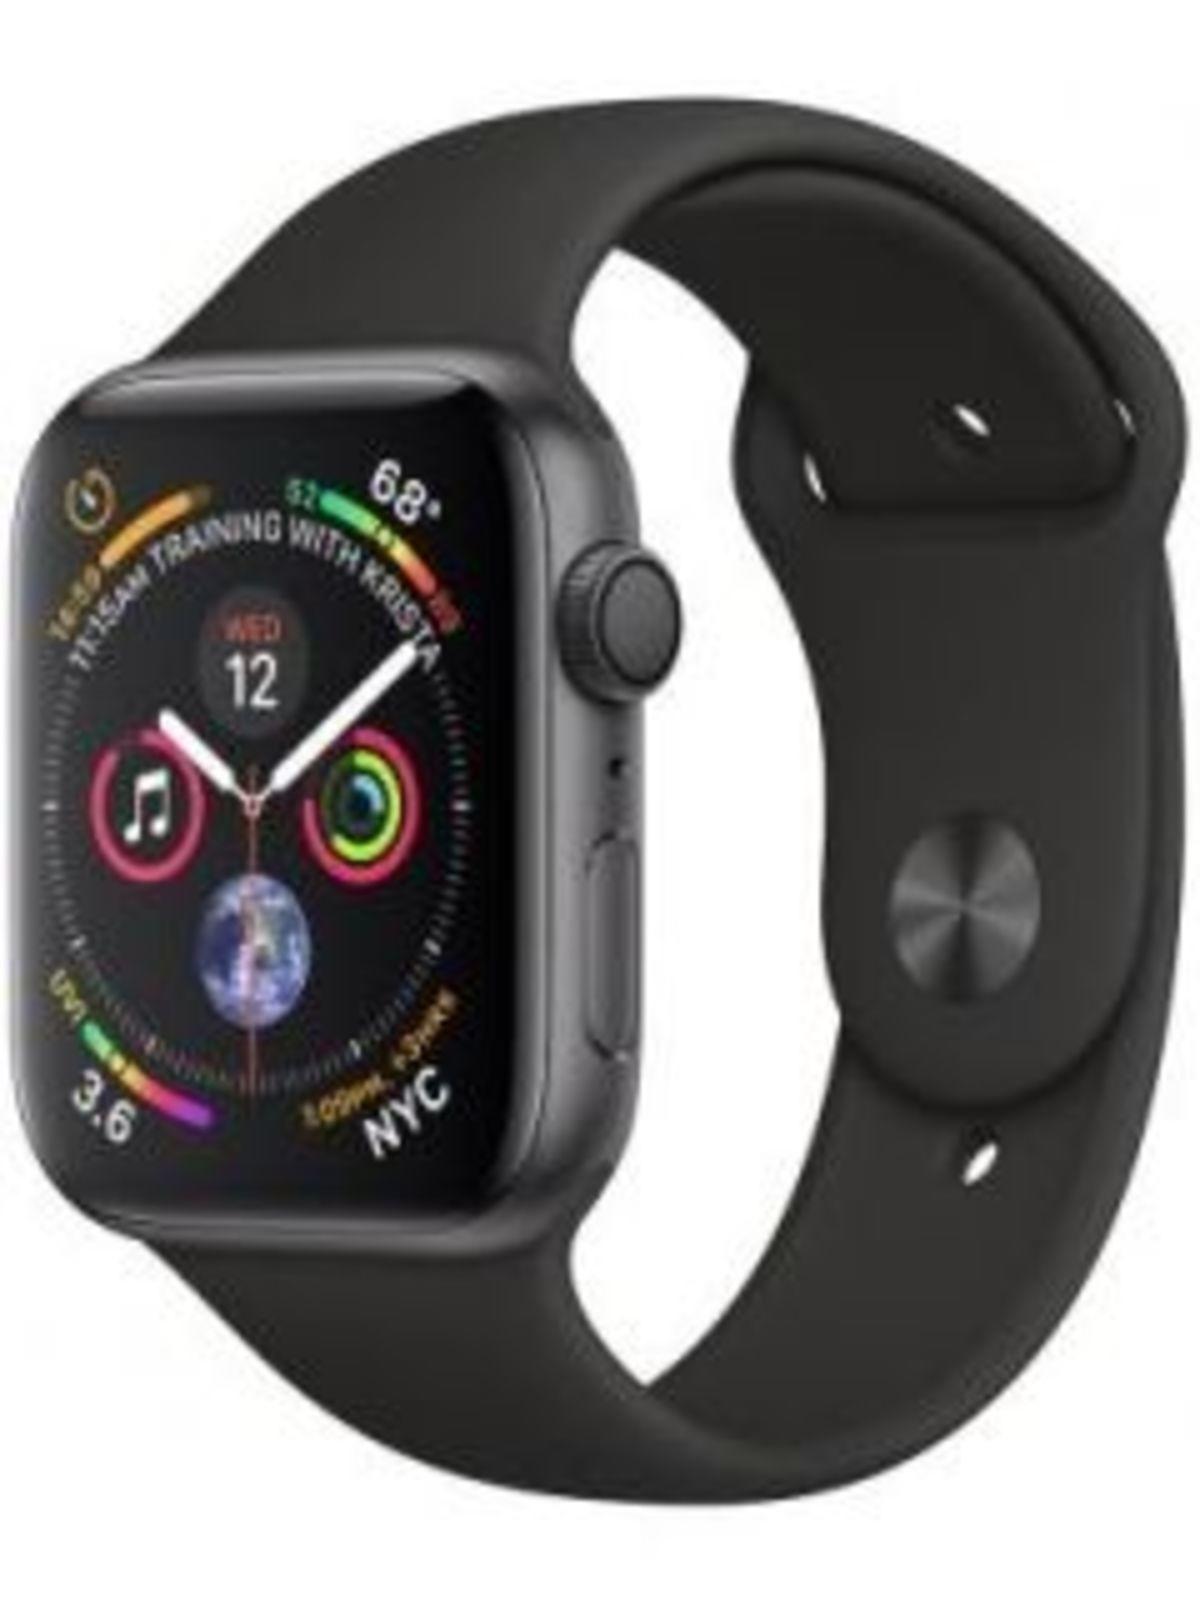 Apple Watch Series 4 Price in India, Full Specifications (15th Sep 2022) at  Gadgets Now